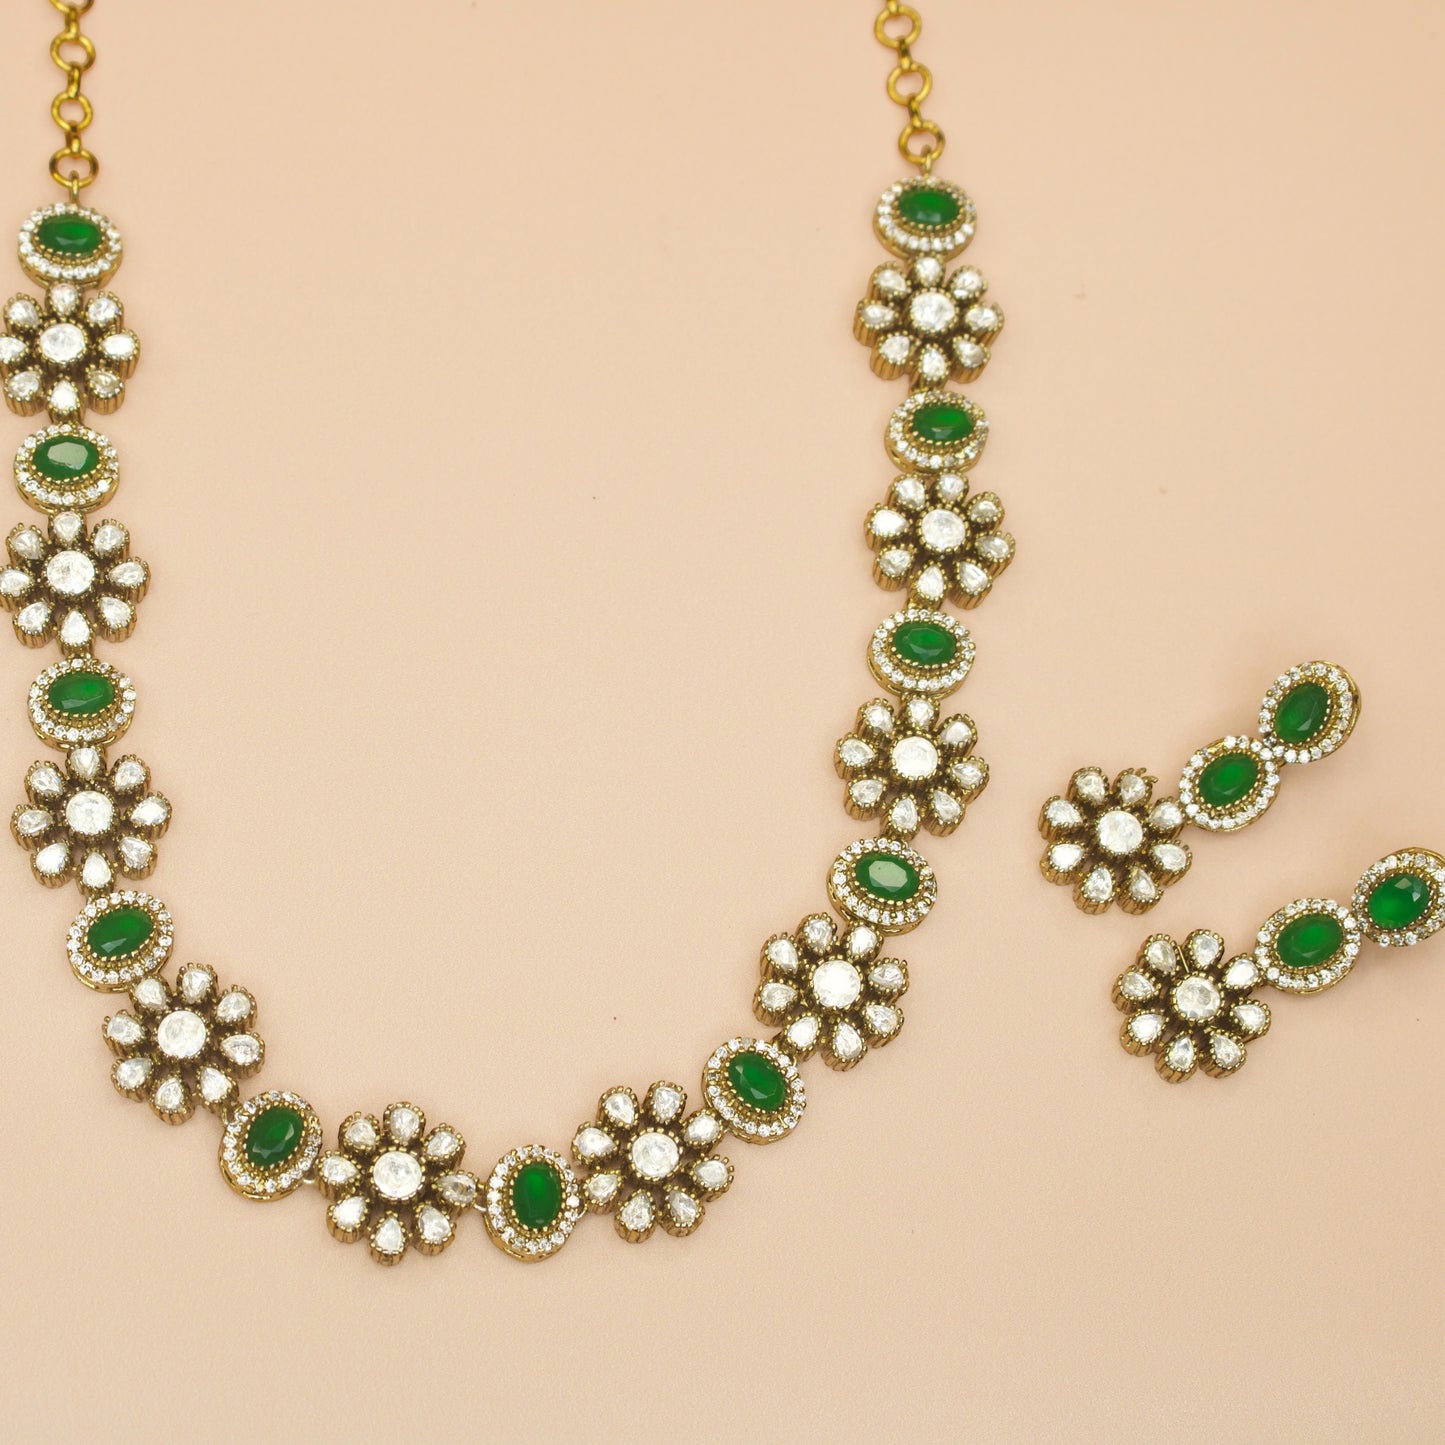 Floral Victorian Necklace Set in purple & green colour